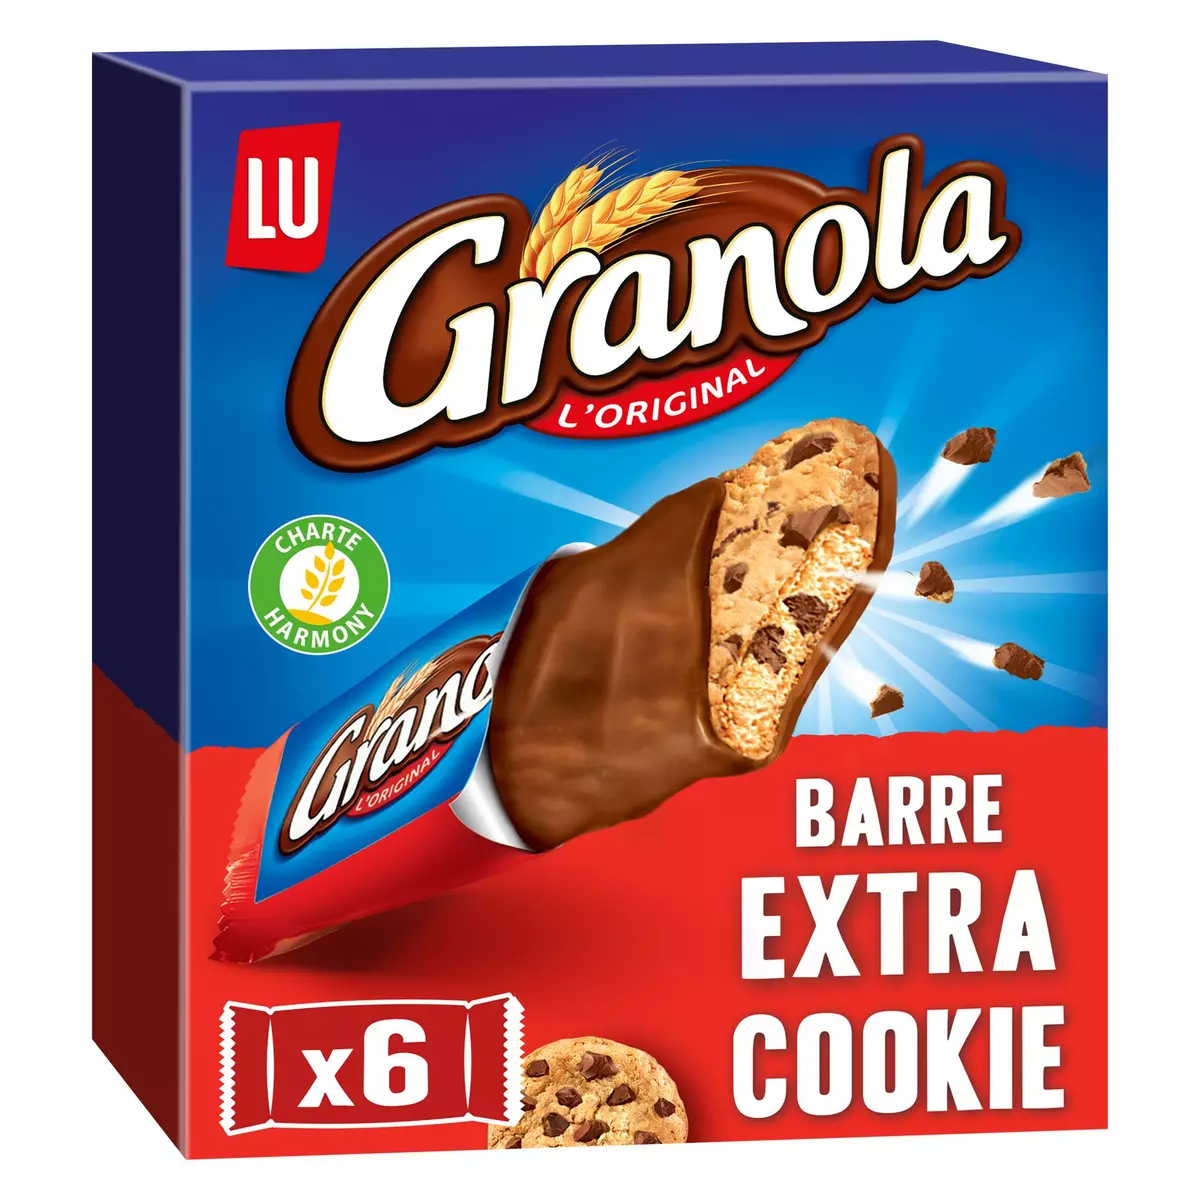 GRANOLA Barre extra cookie, sachets individuels 6 biscuits 168g